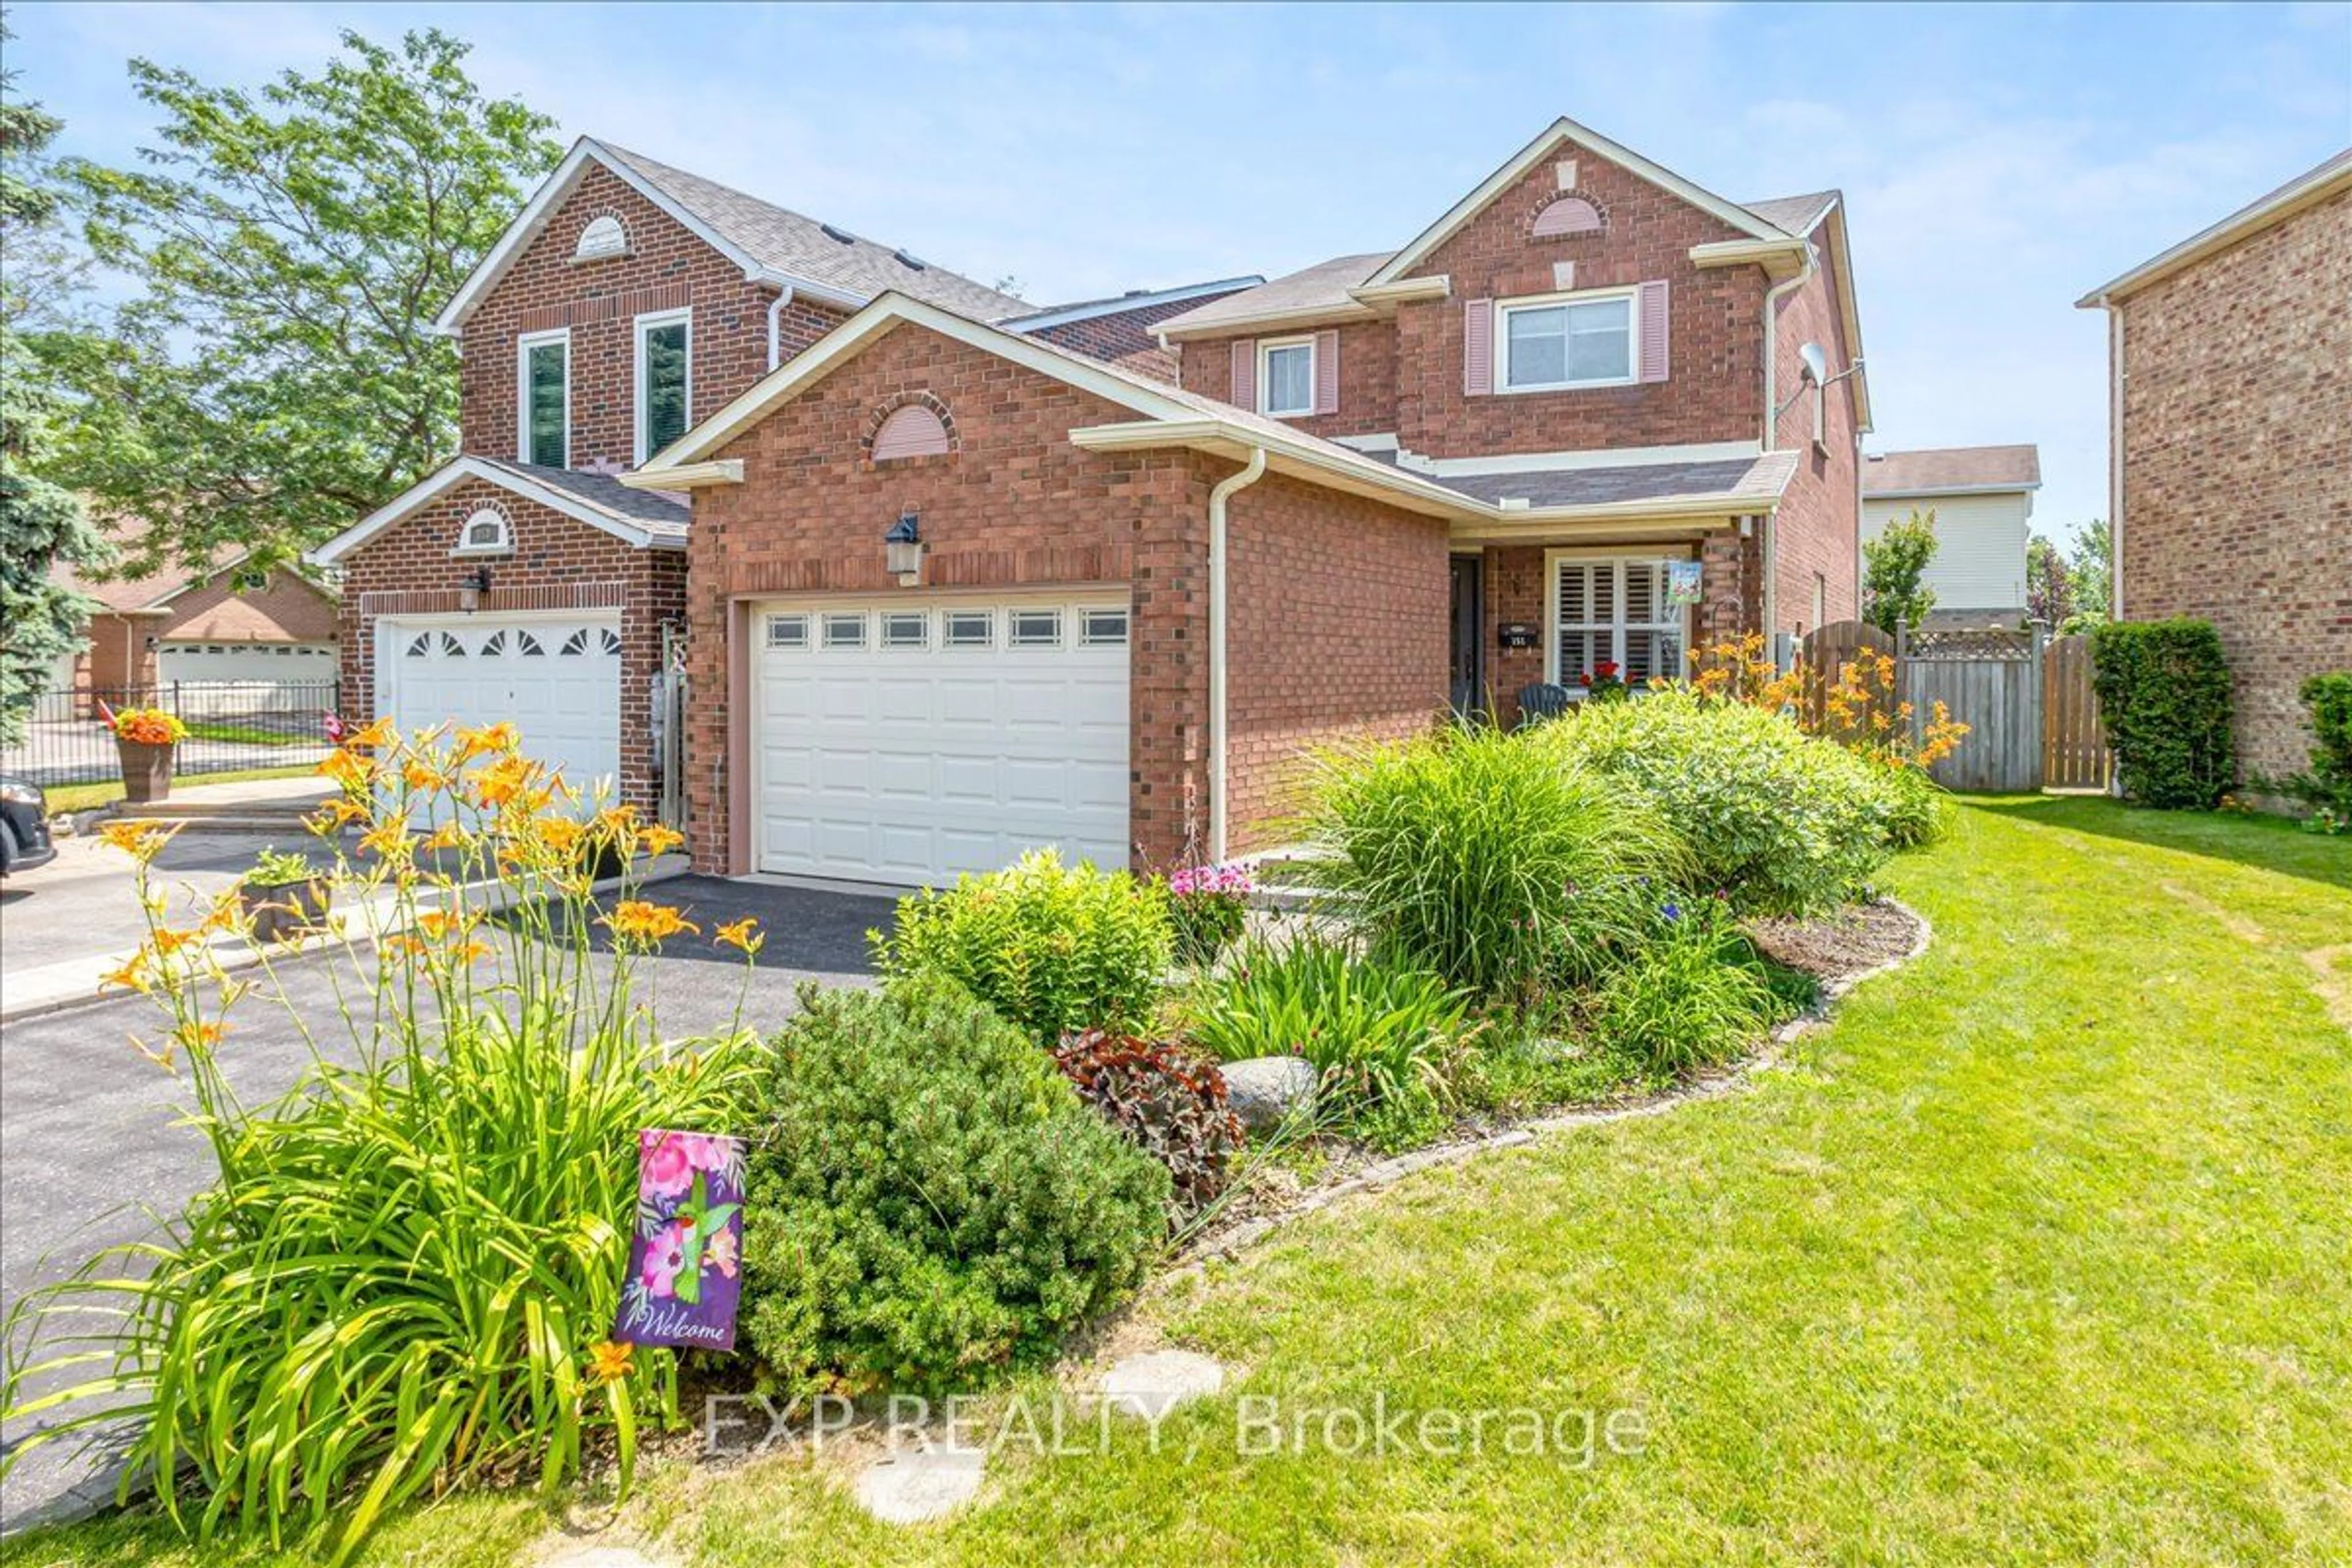 Home with brick exterior material for 151 Reed Dr, Ajax Ontario L1S 6P8